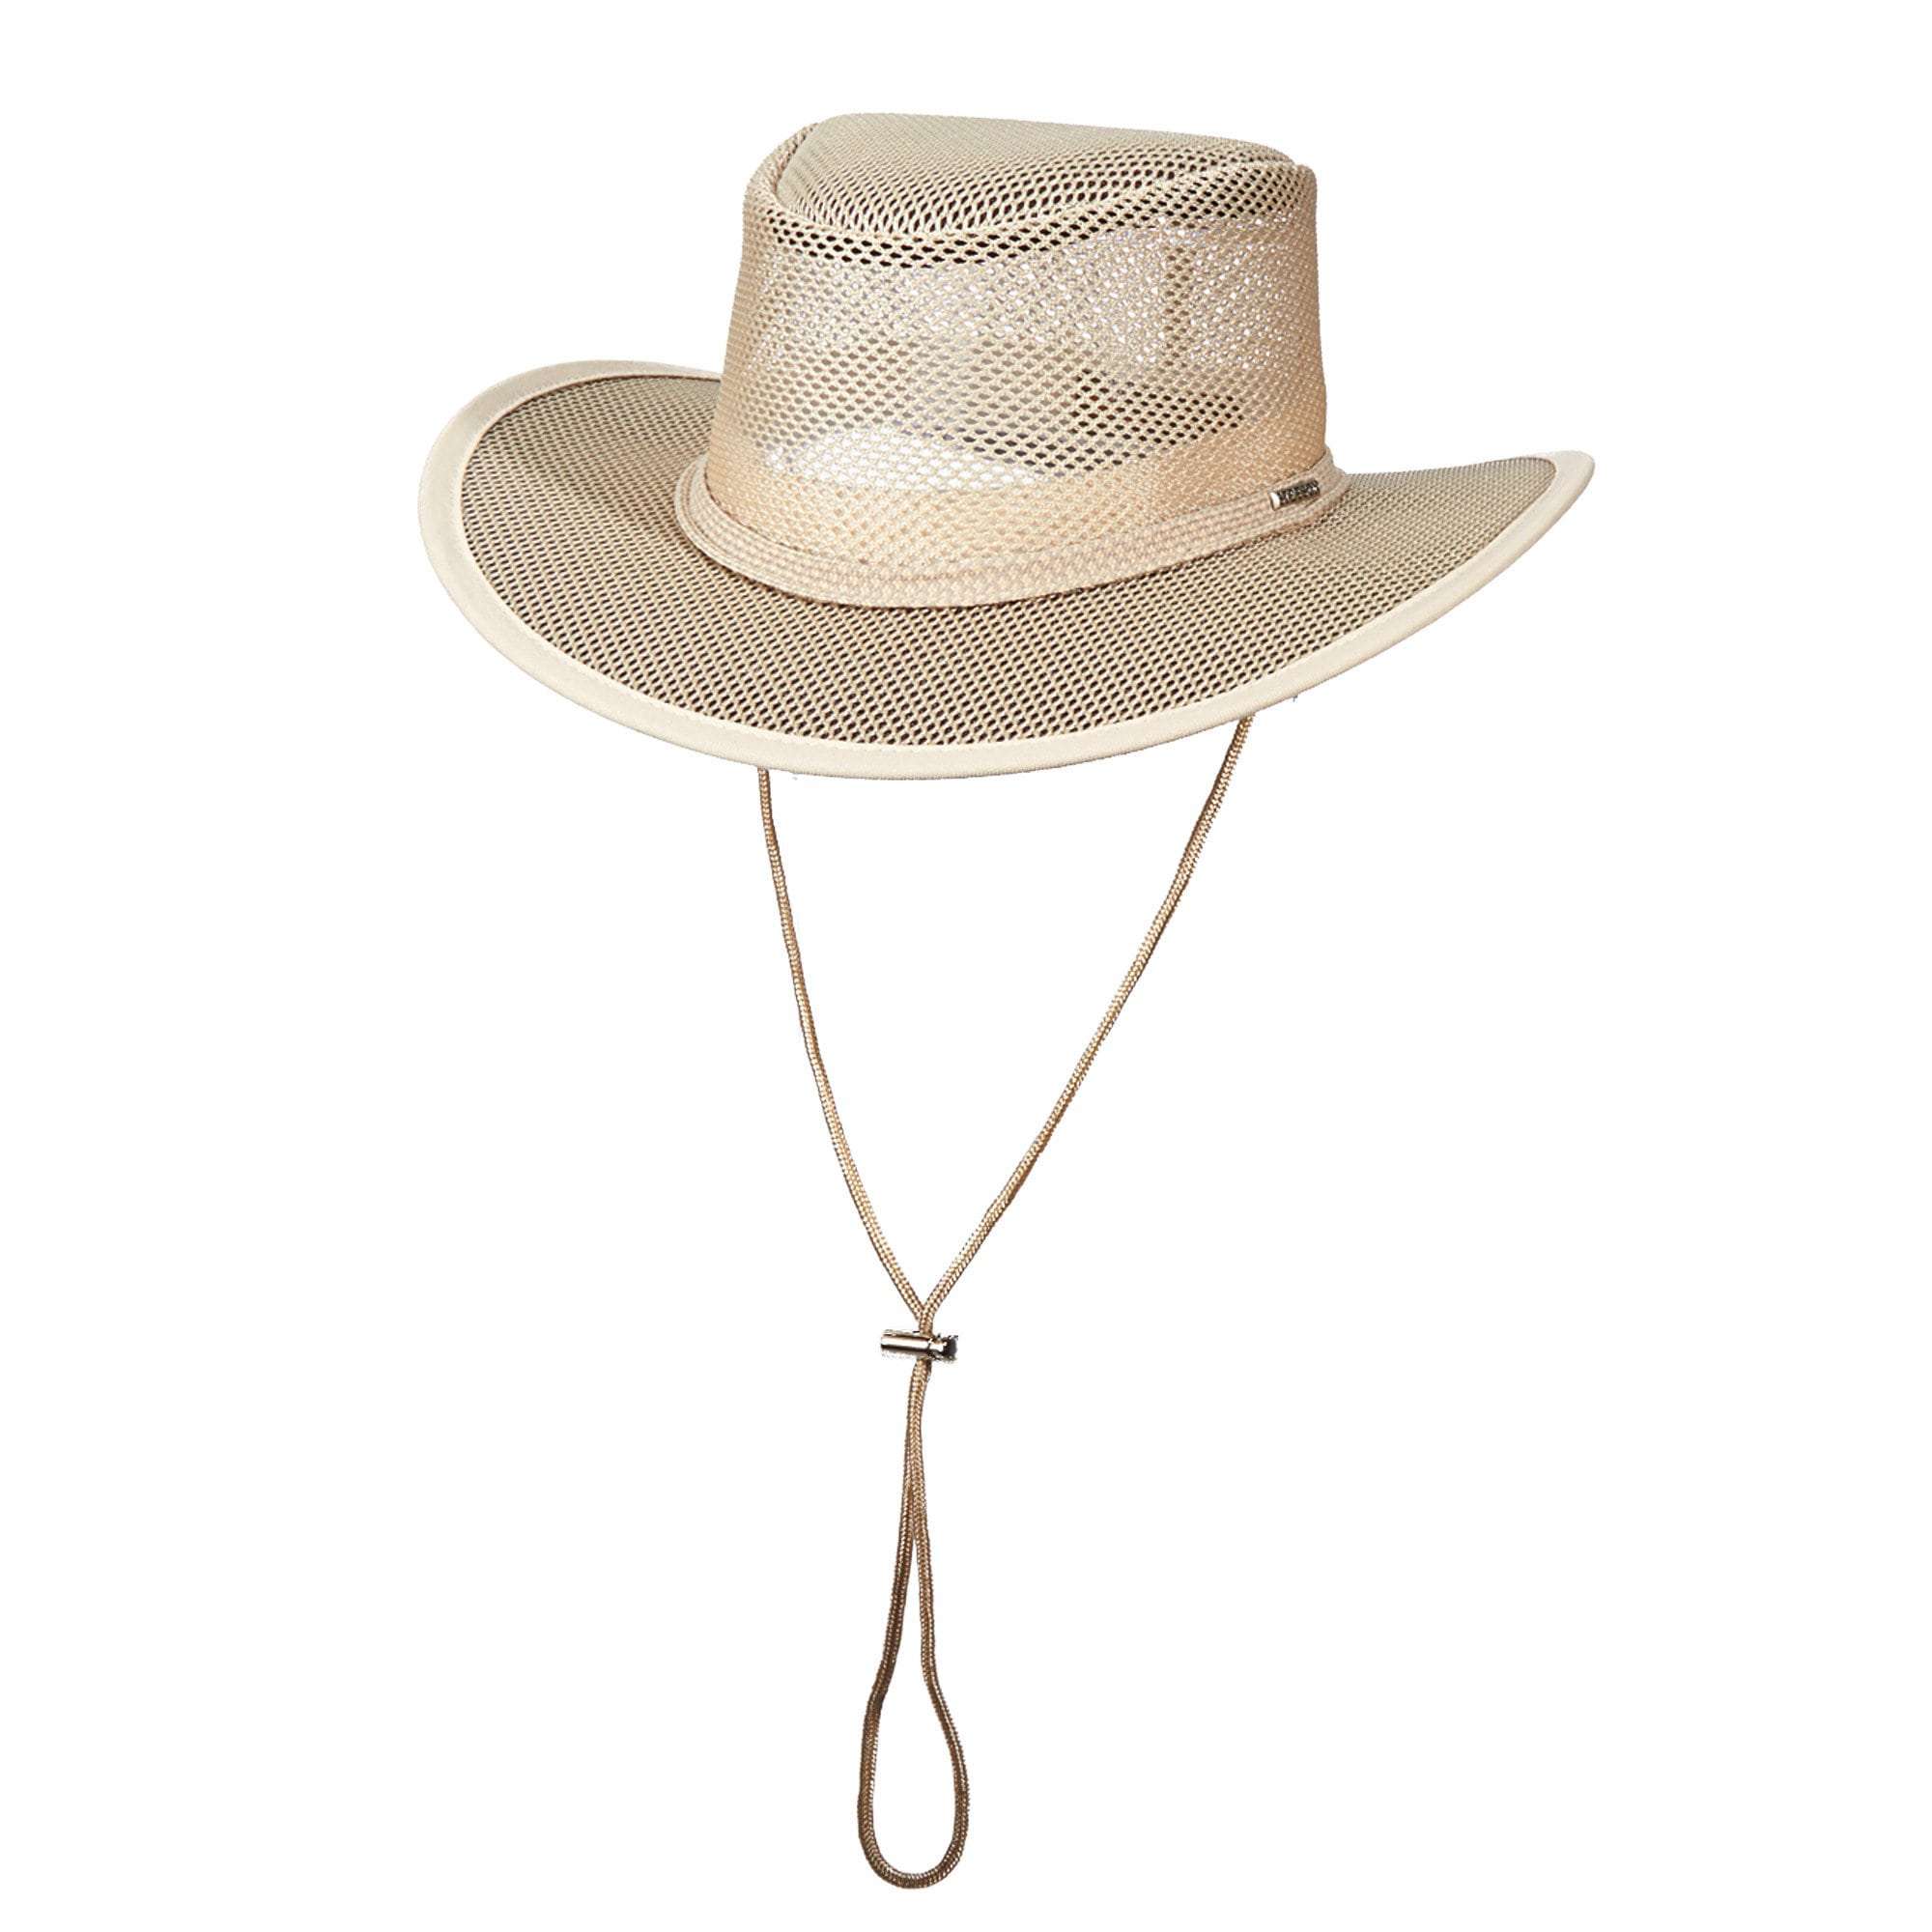 Stetson Hats Mesh Outback Hat for Men up to 2XL - Clay